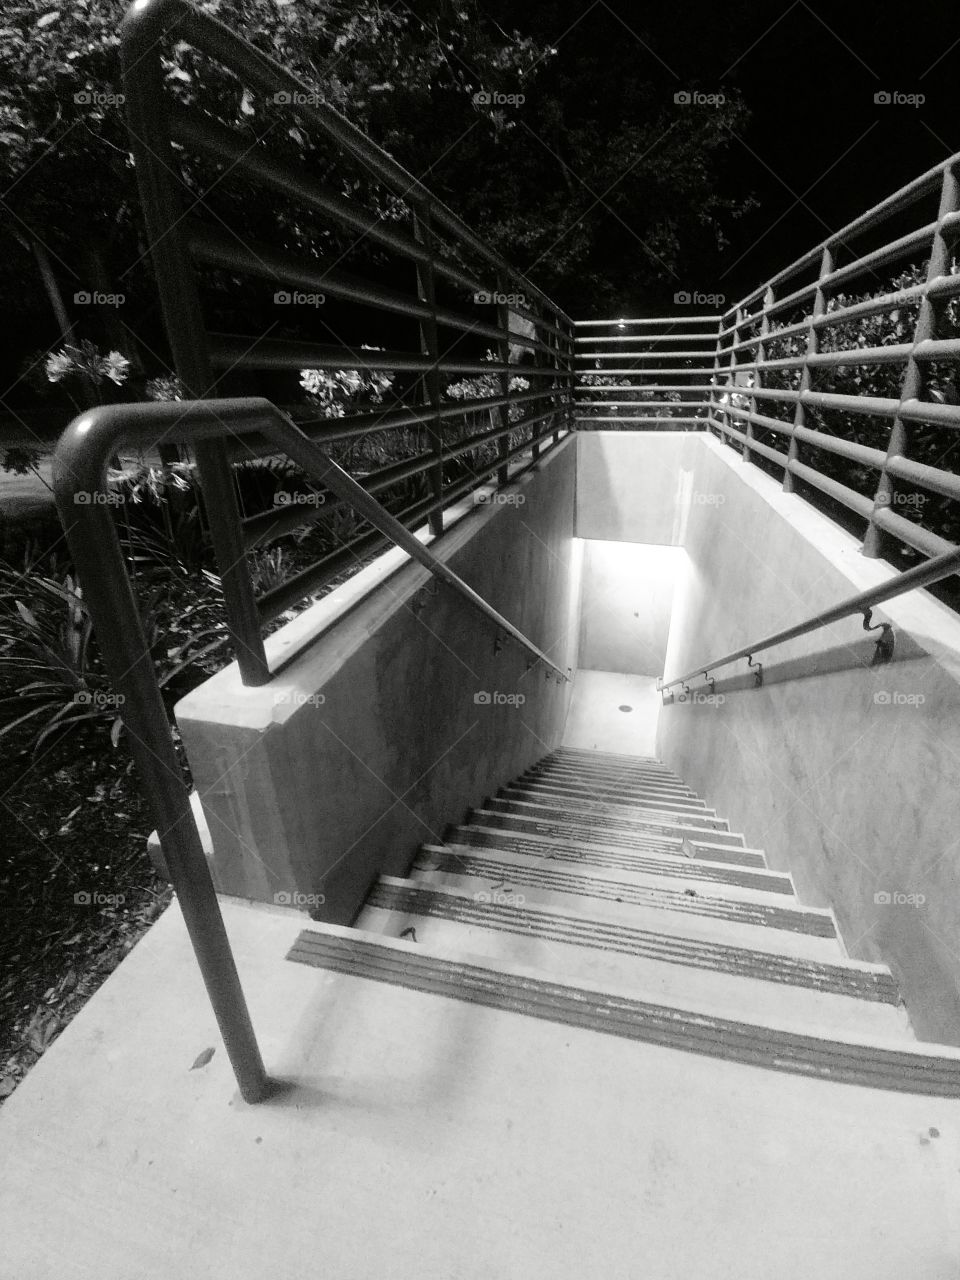 Going down? Black and white staircase leading to the underbelly of our dark and scary world